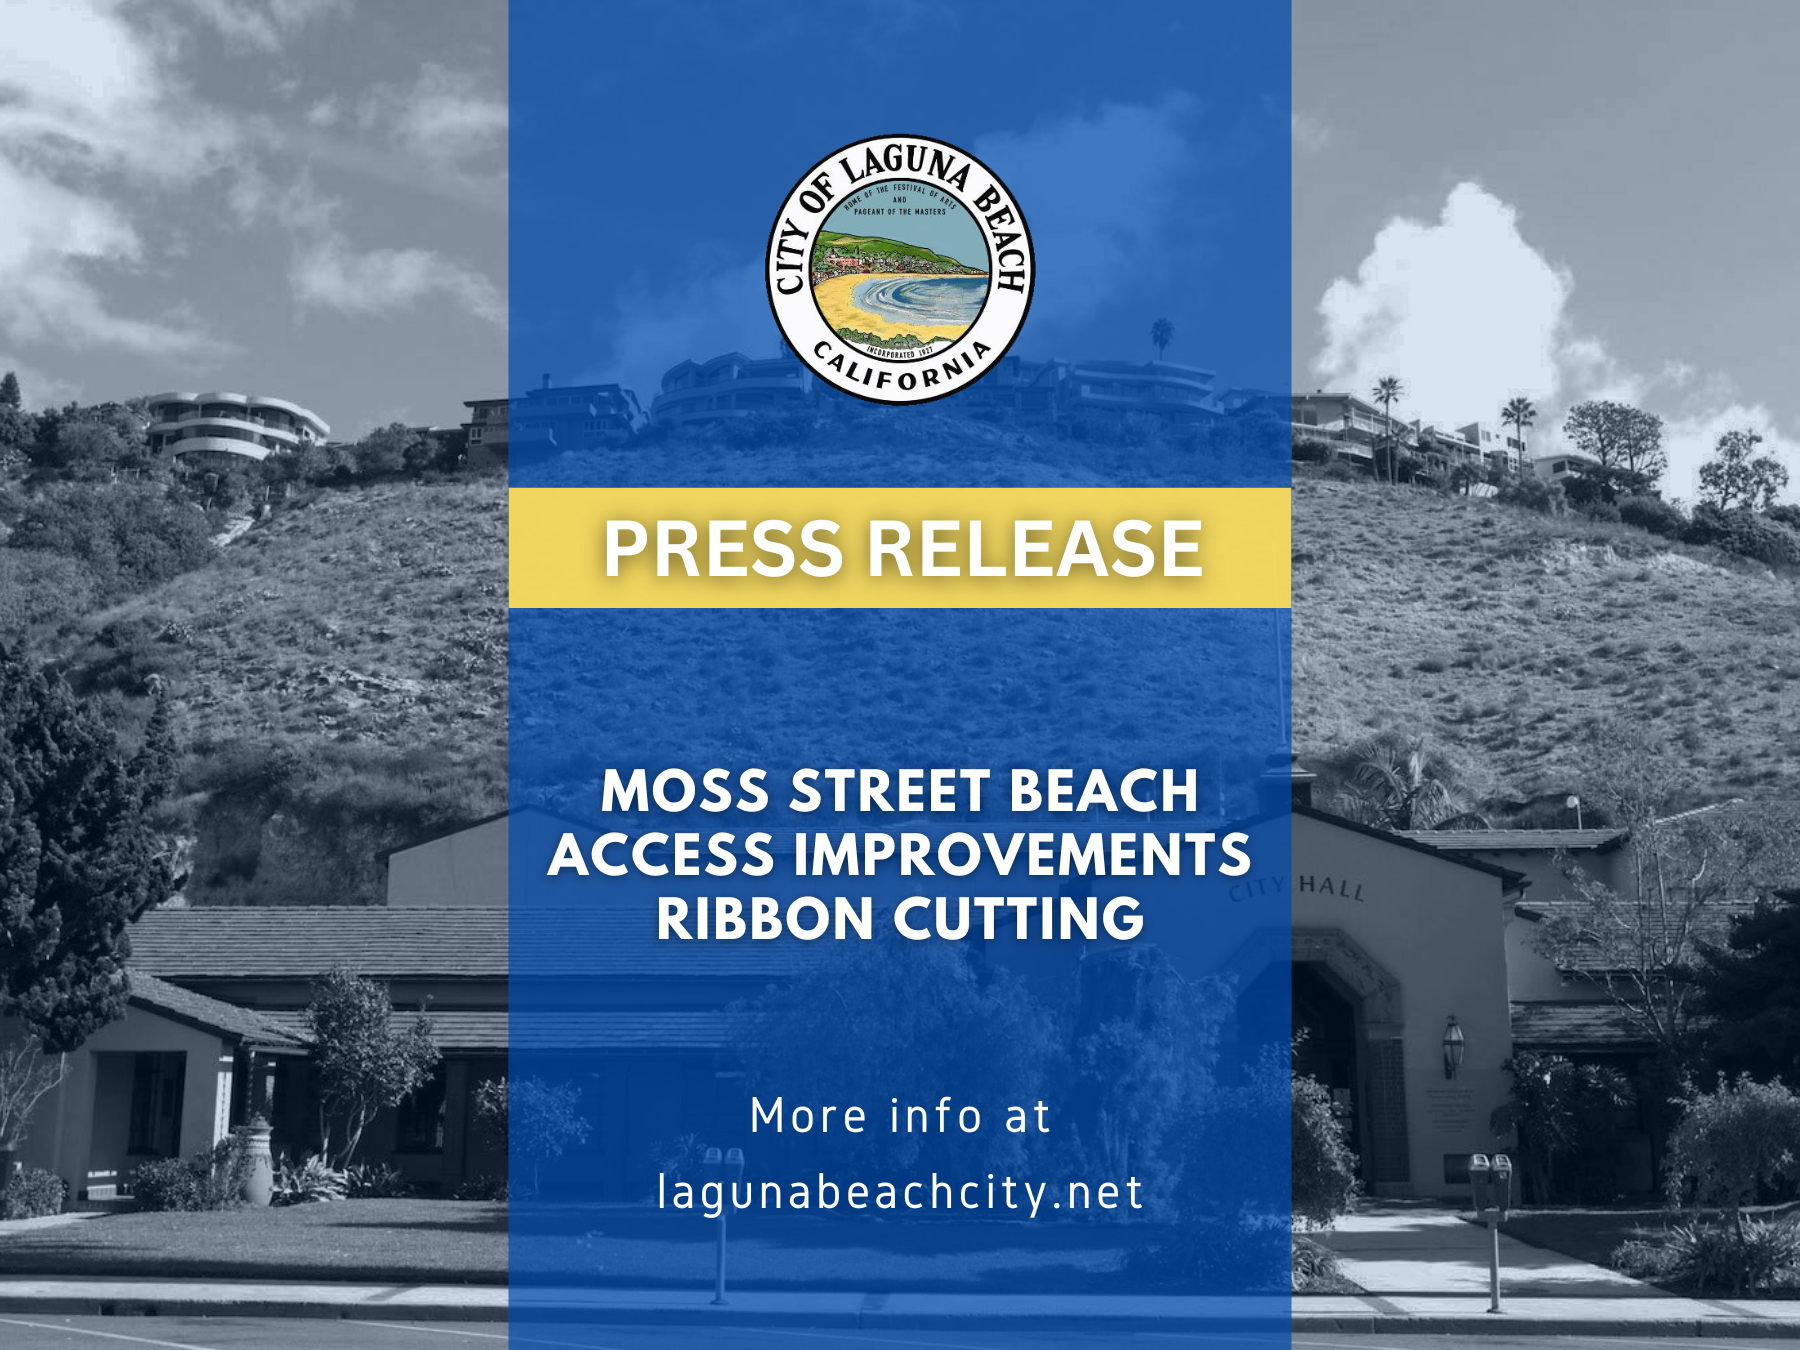 Public Invited to New Moss Street Beach Access